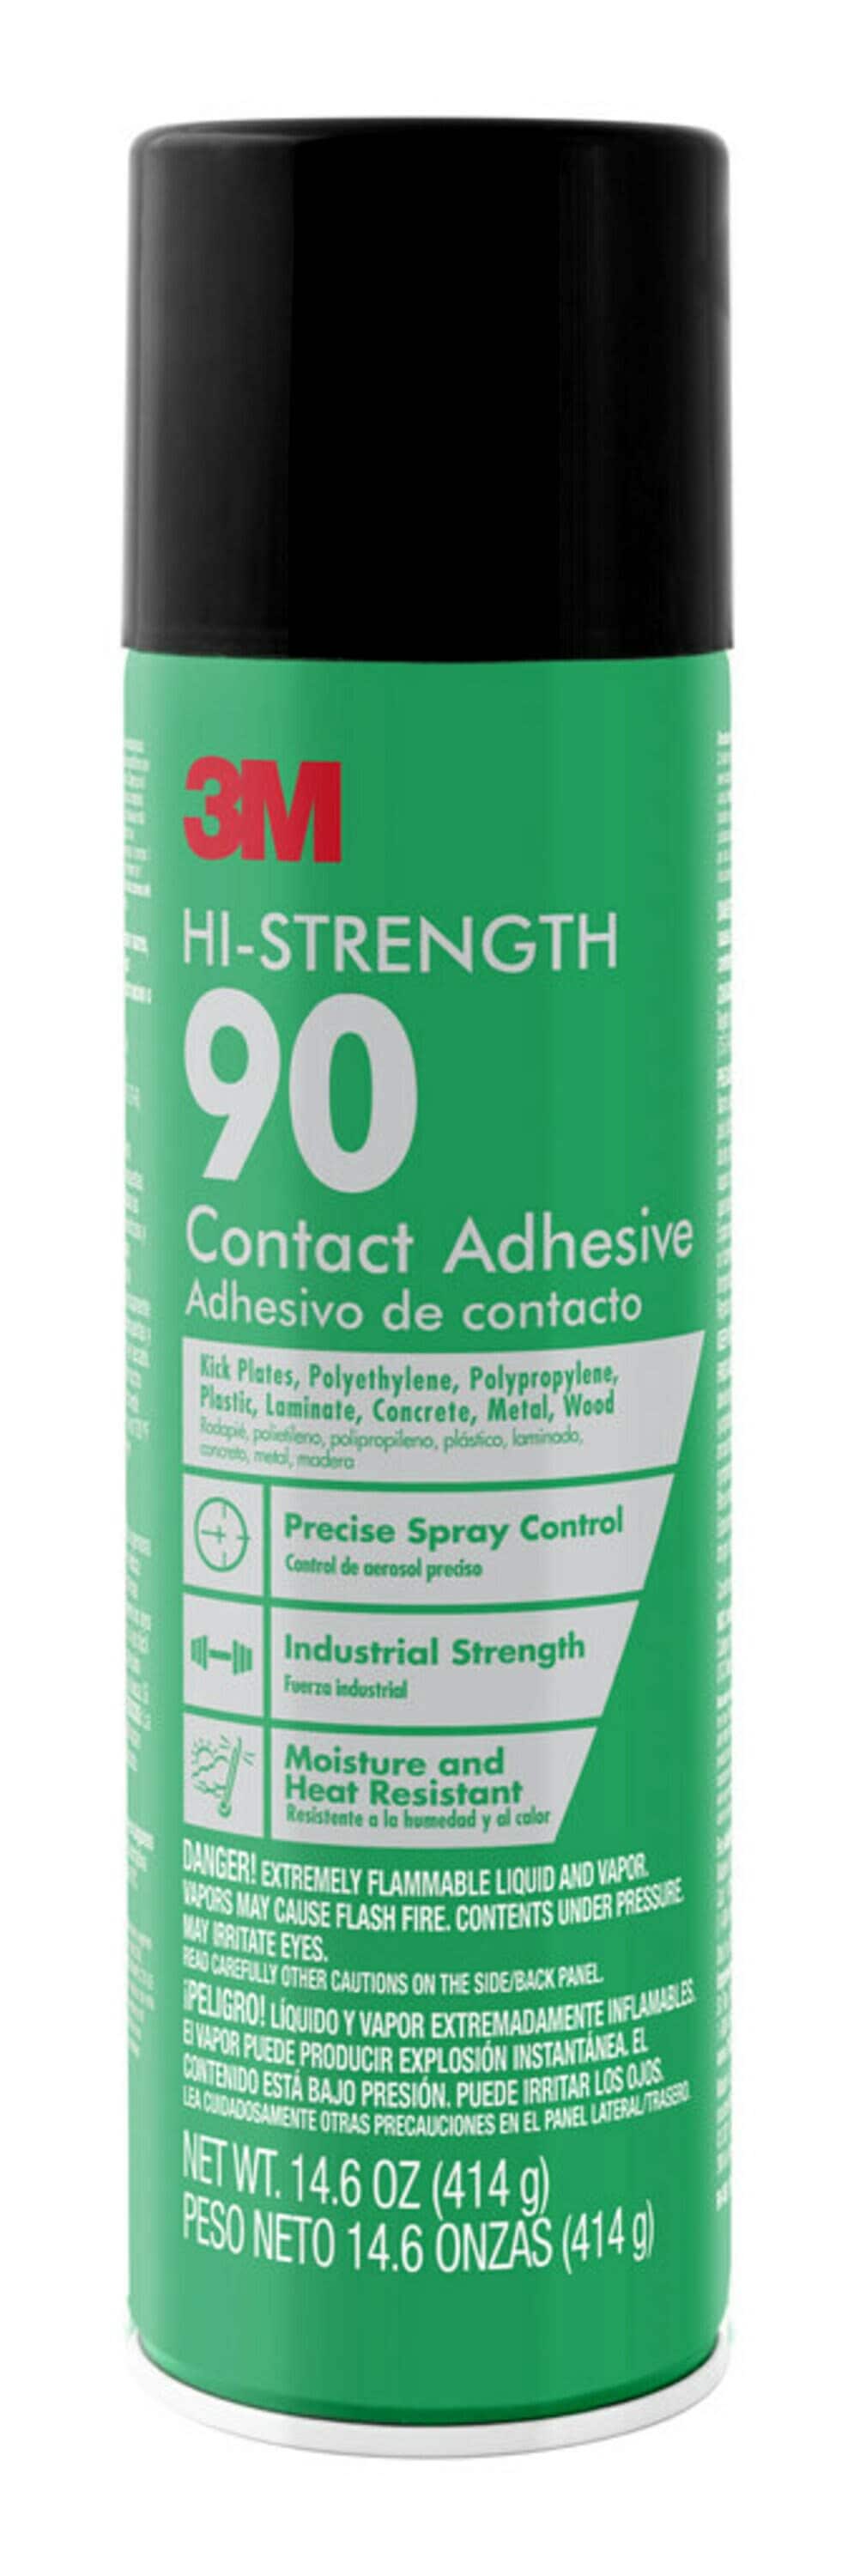 Kit Size Contact Cement (.54 Oz.)